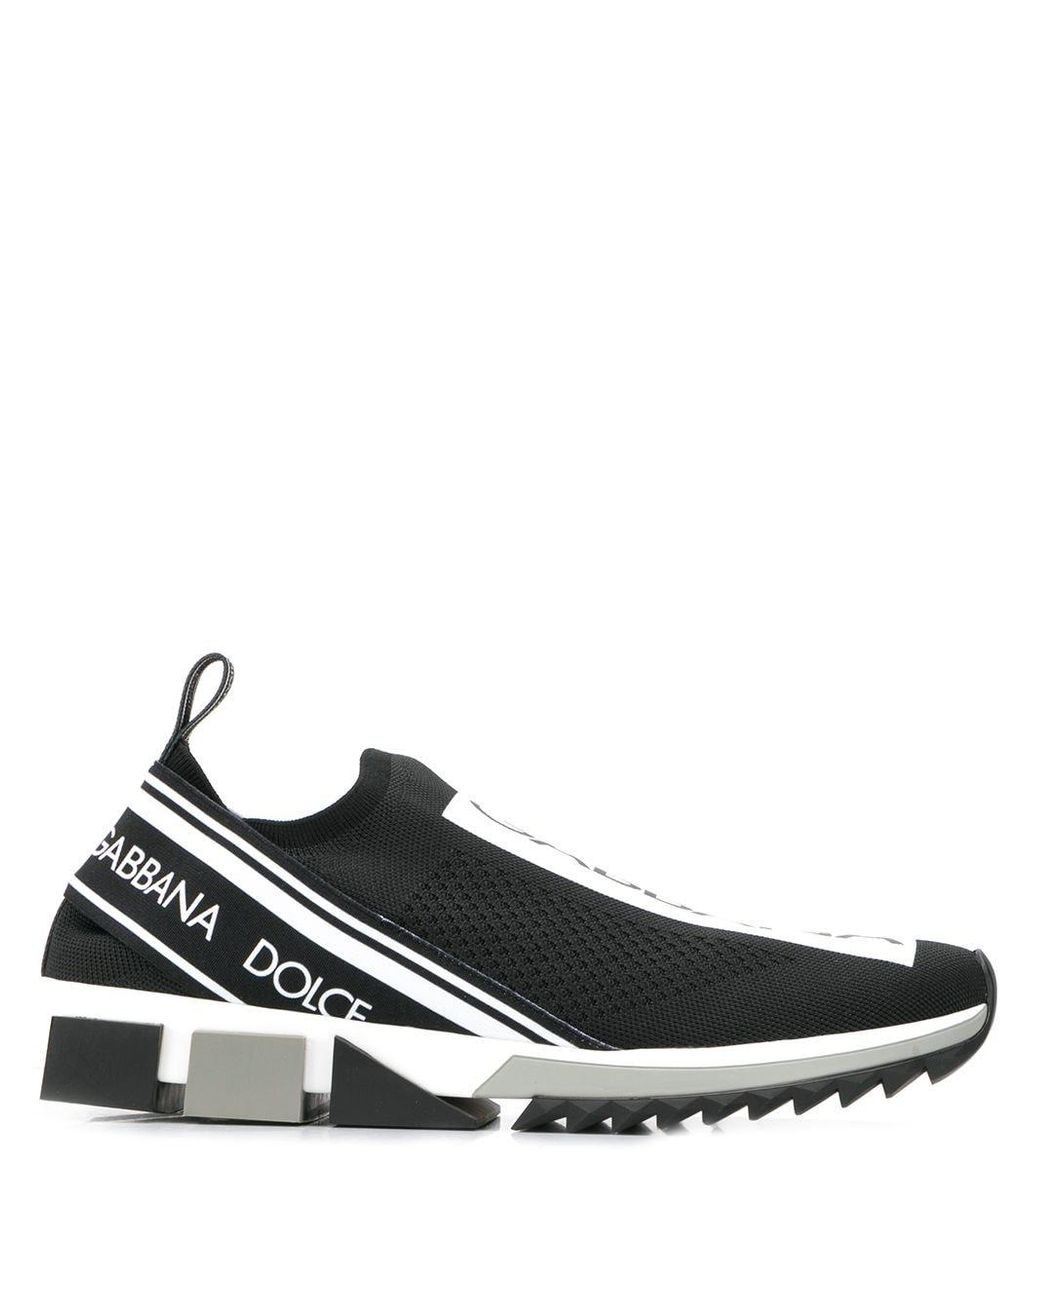 Dolce & Gabbana Logo Printed Sneakers in White for Men - Lyst